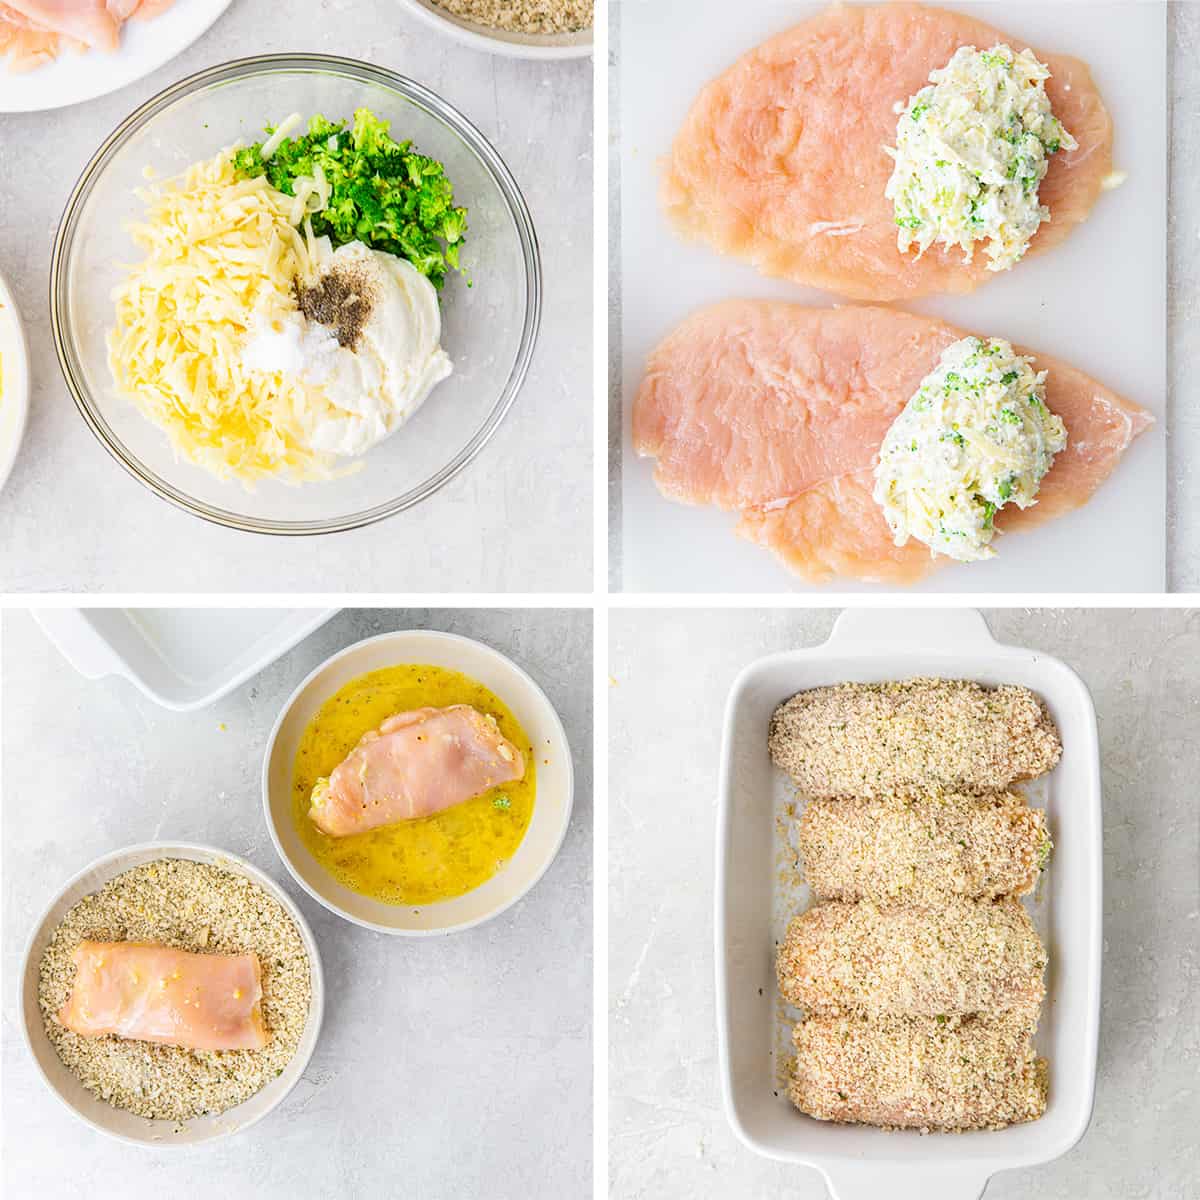 Four images show a broccoli cheese mixture in a bowl and on chicken breasts before being rolled up and breaded.